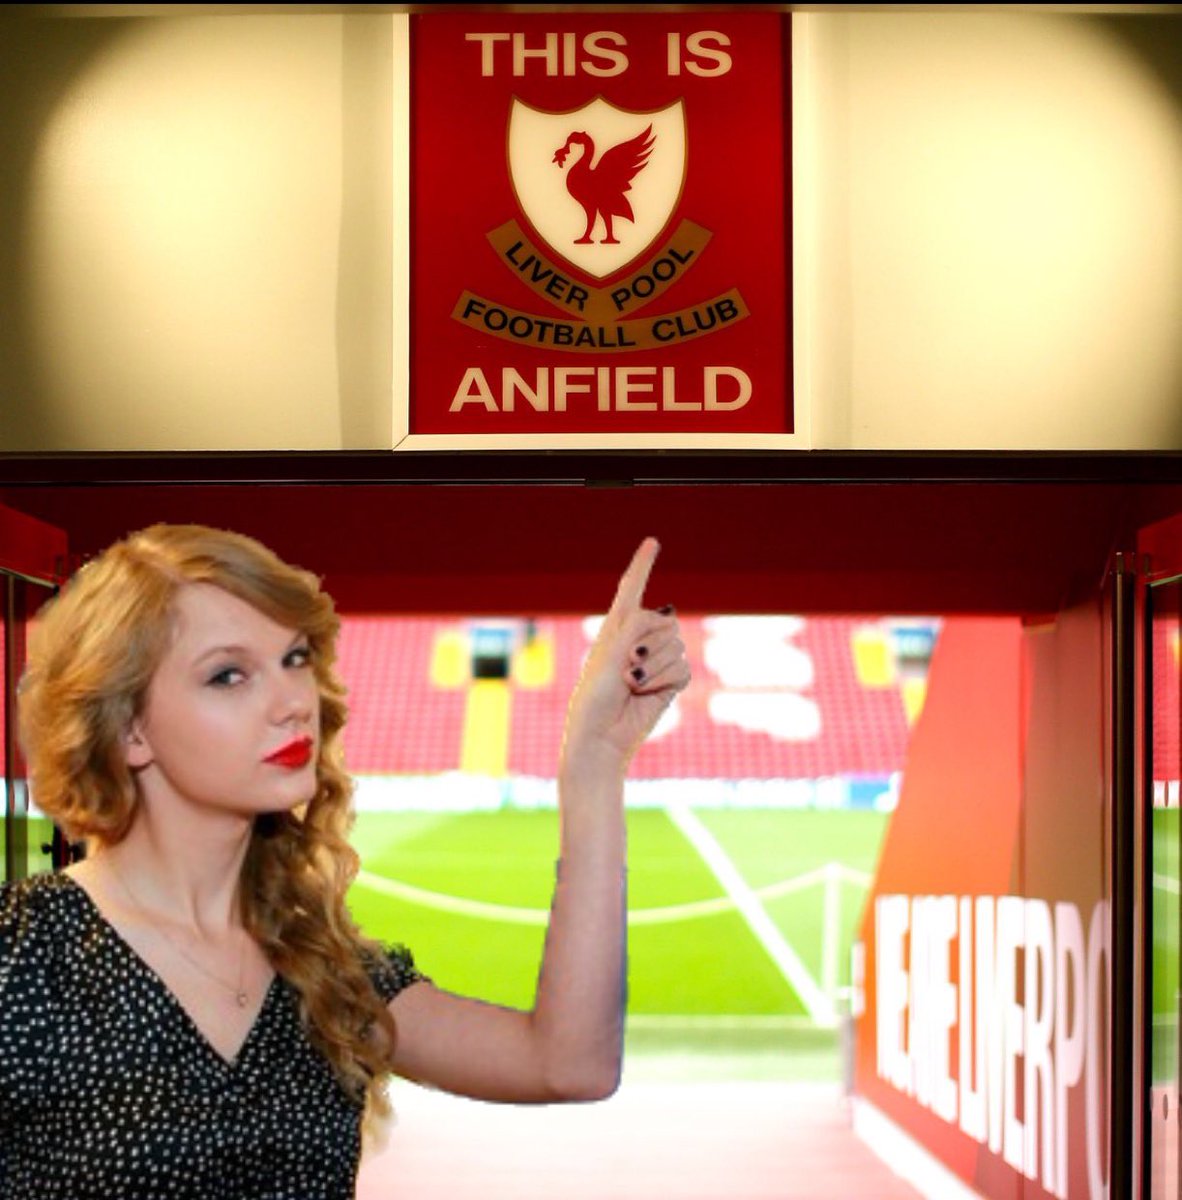 The reds saved up for 3 years to sign Taylor swift. Well done 👏🏻 YMCA